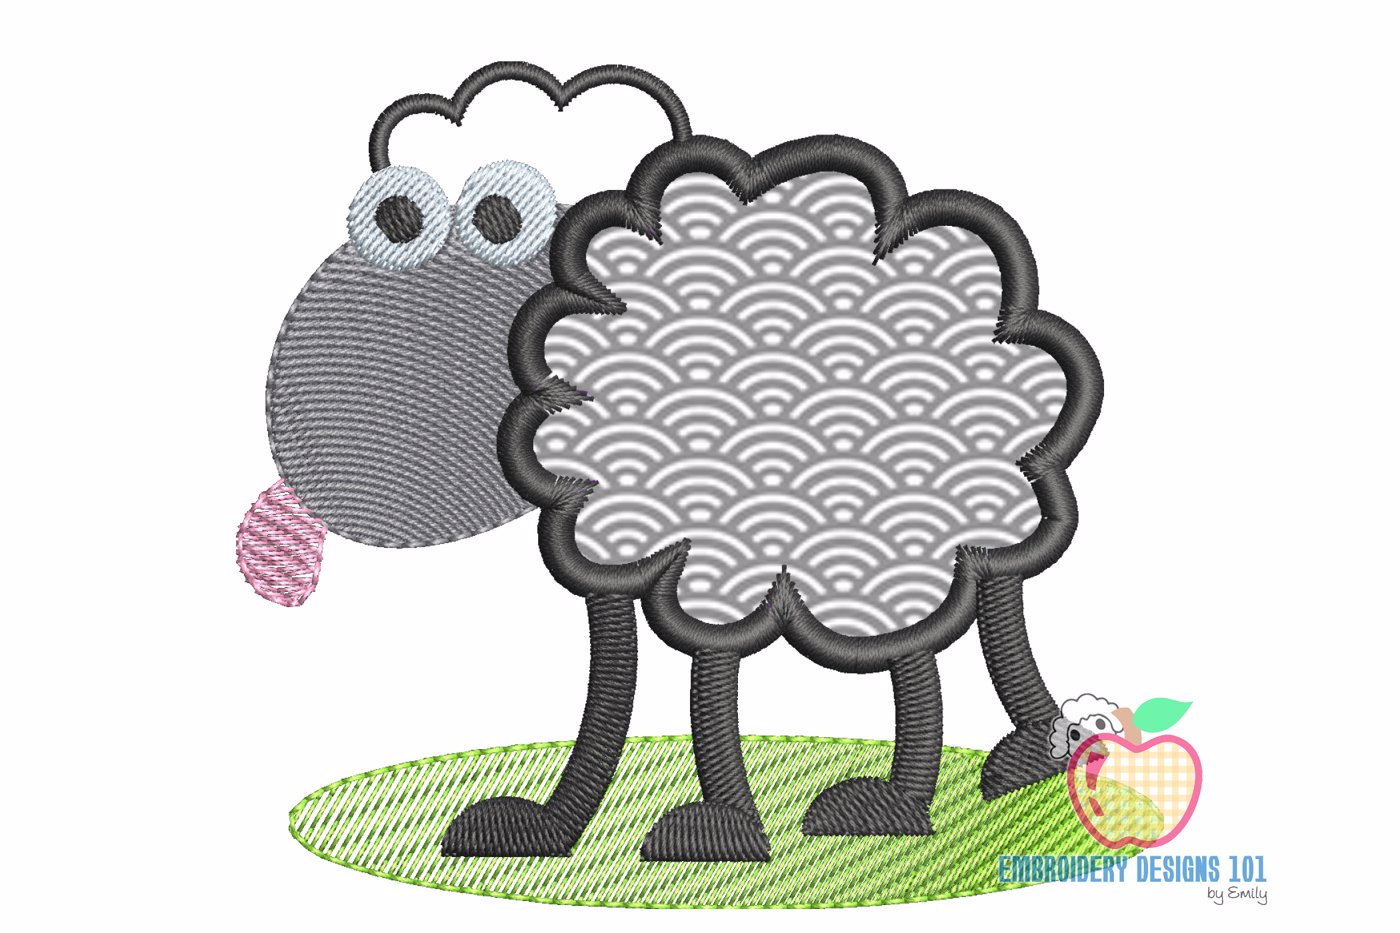 A Sheep Made As The Funky Design